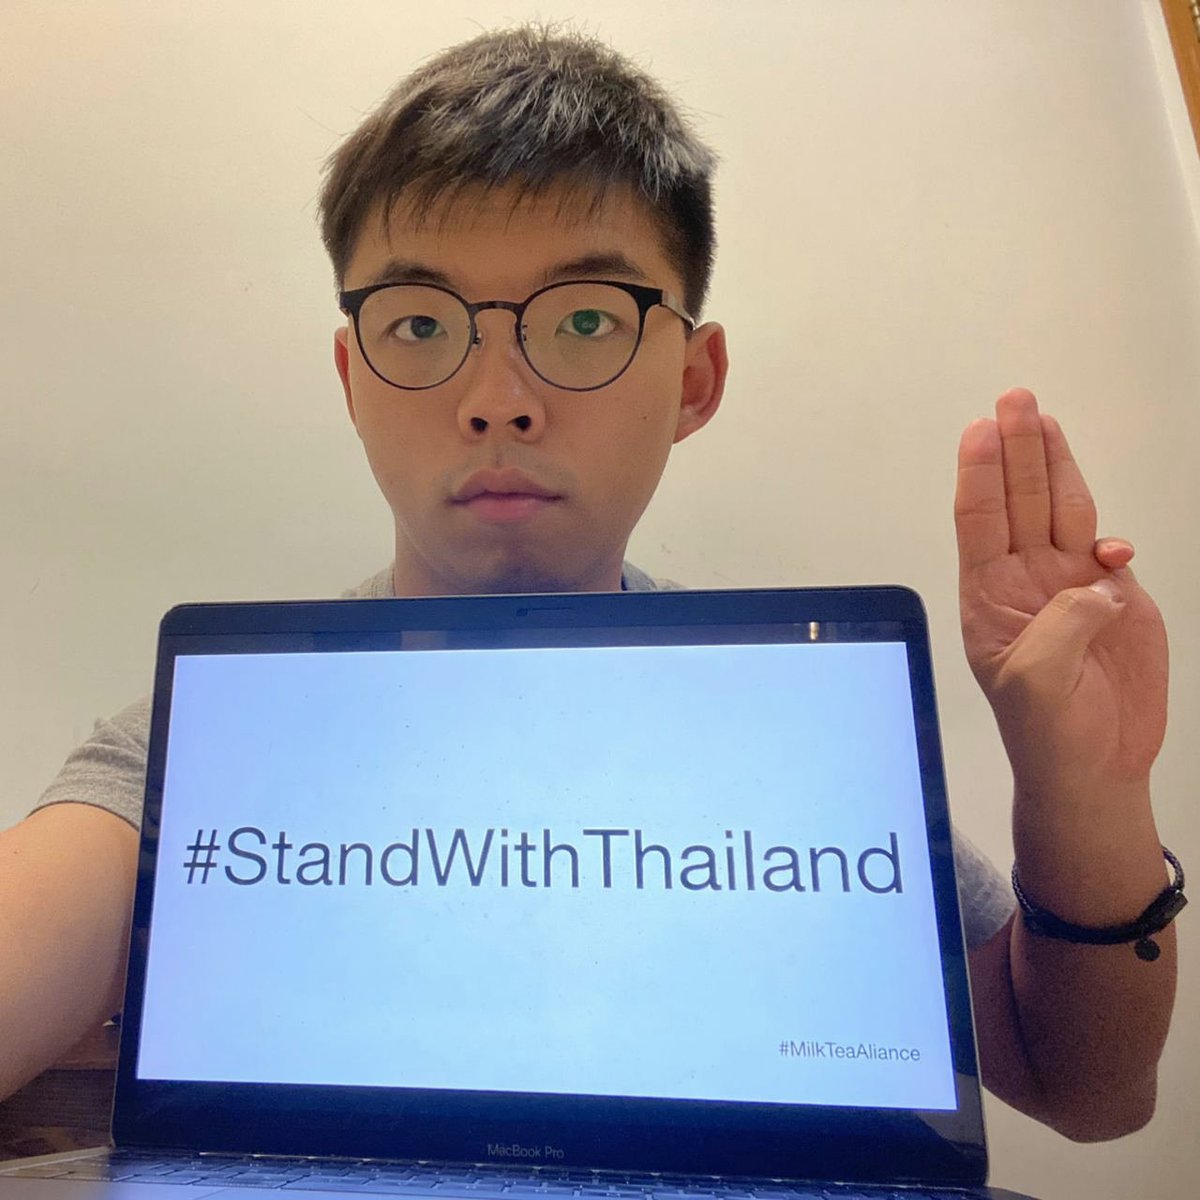 #StandWithThailand #MilkTeaAliance  

People should not be afraid of their governments. 
Only governments should be afraid of their people. 
(V for Vendetta)